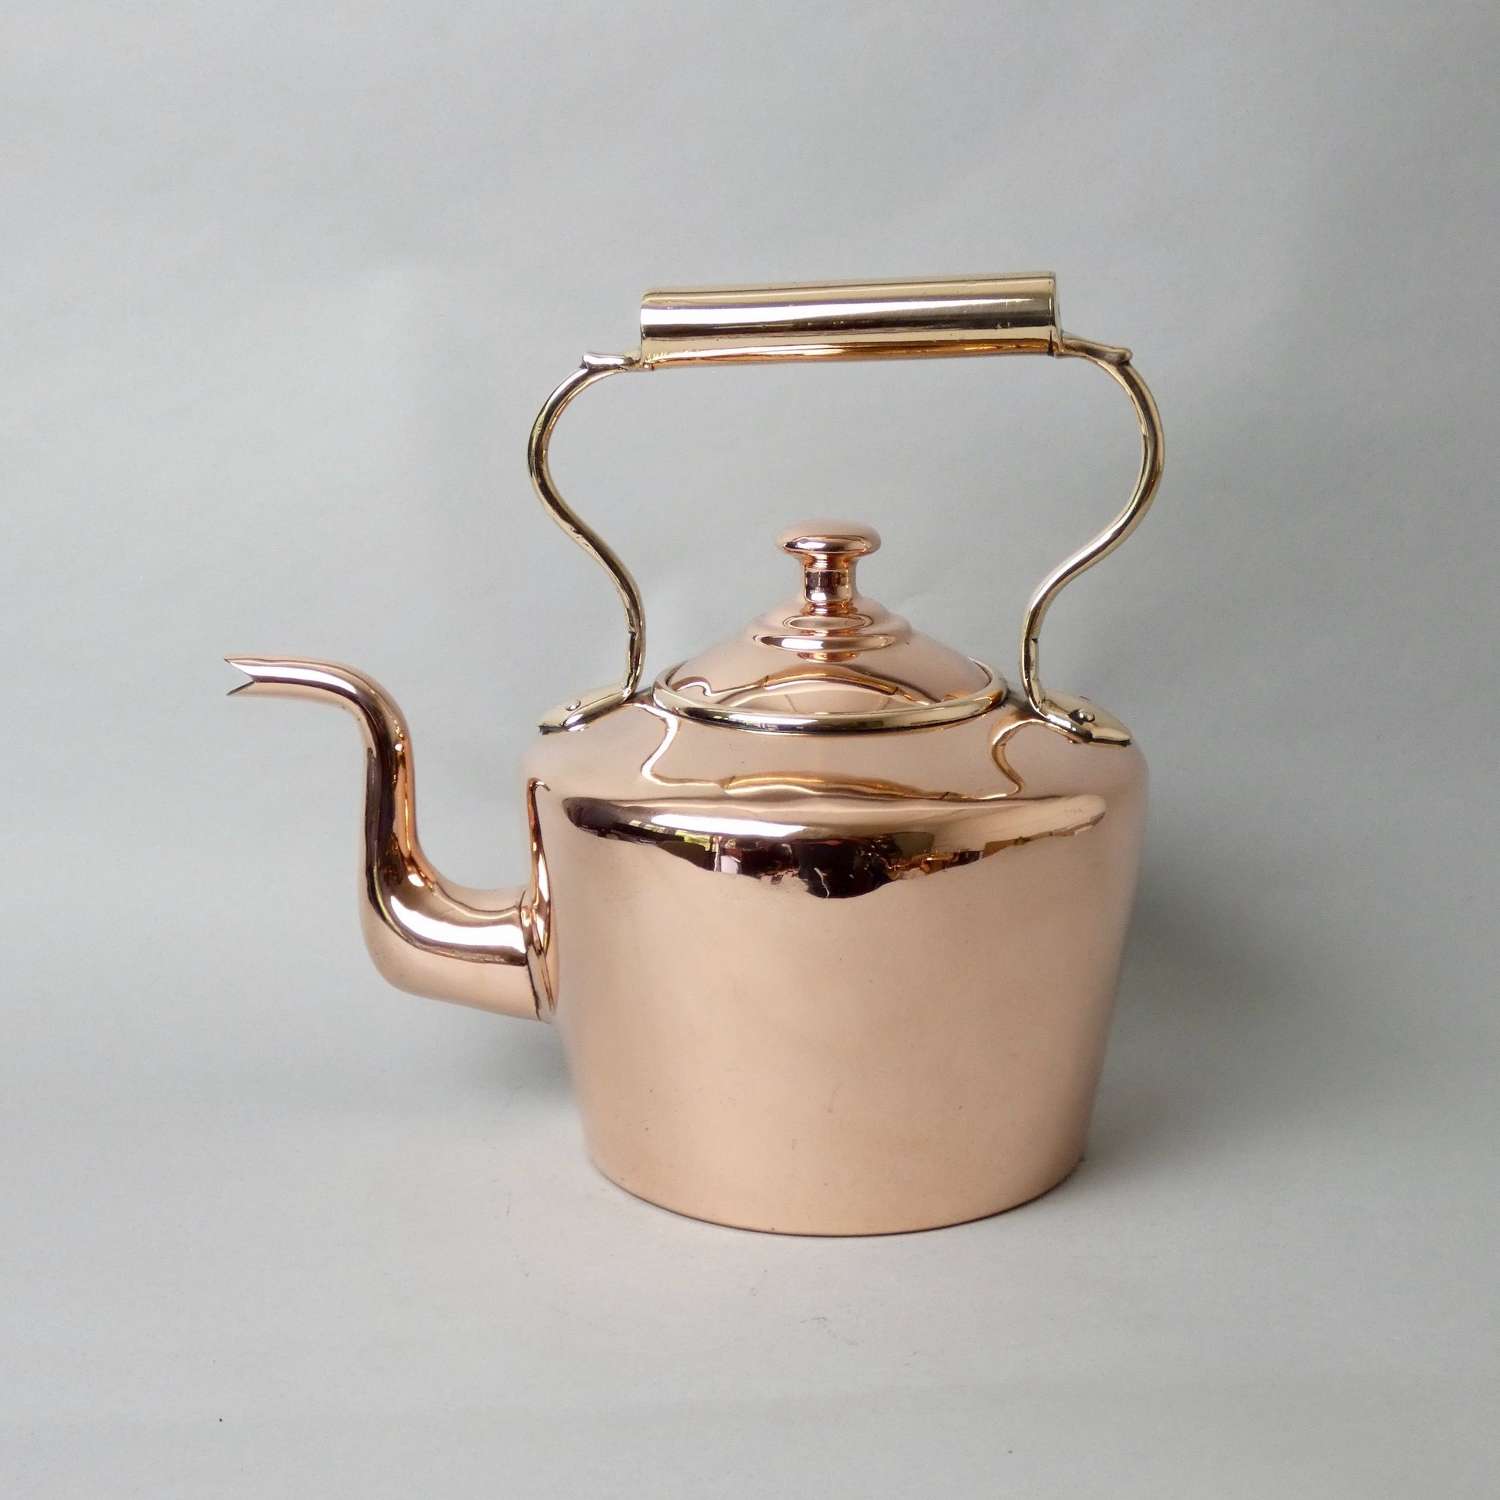 Good Quality, Victorian Copper Kettle